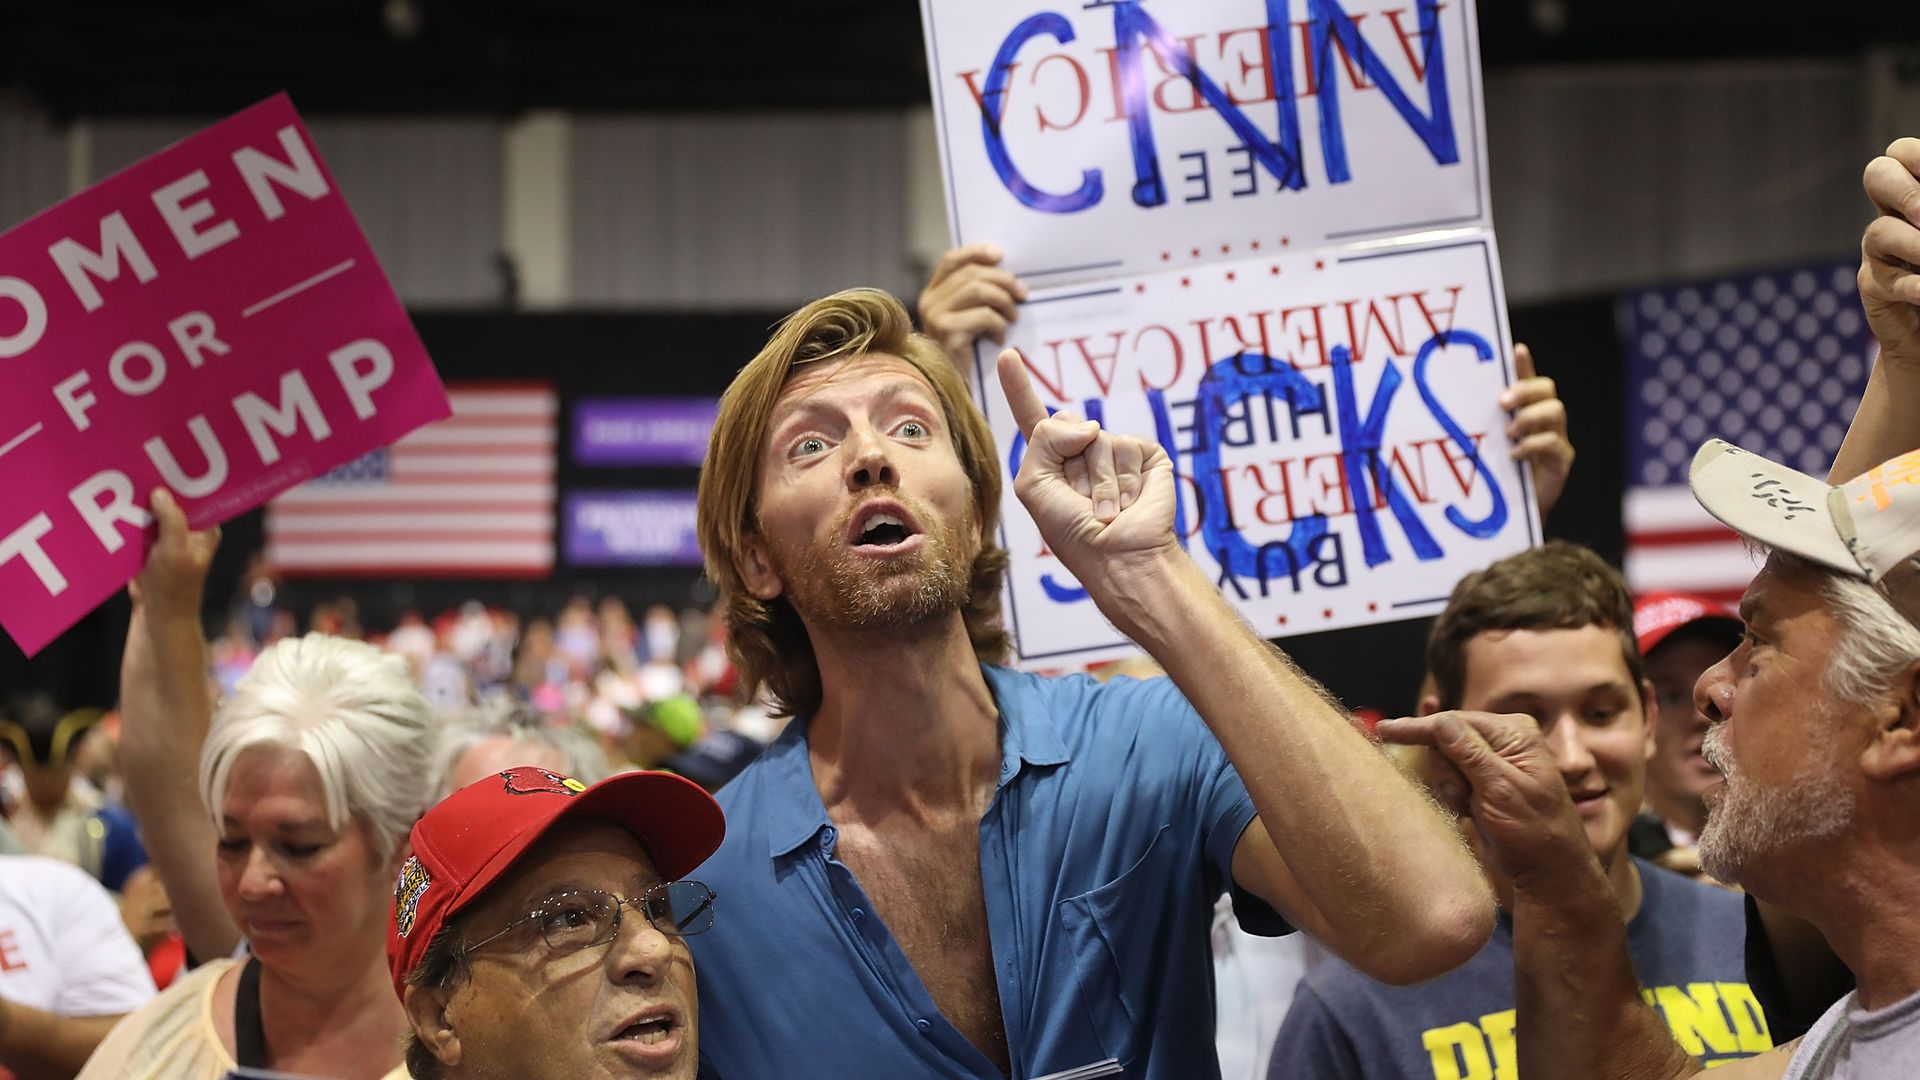 People at a Trump rally yelling, holding a sign that says "CNN SUCKS"